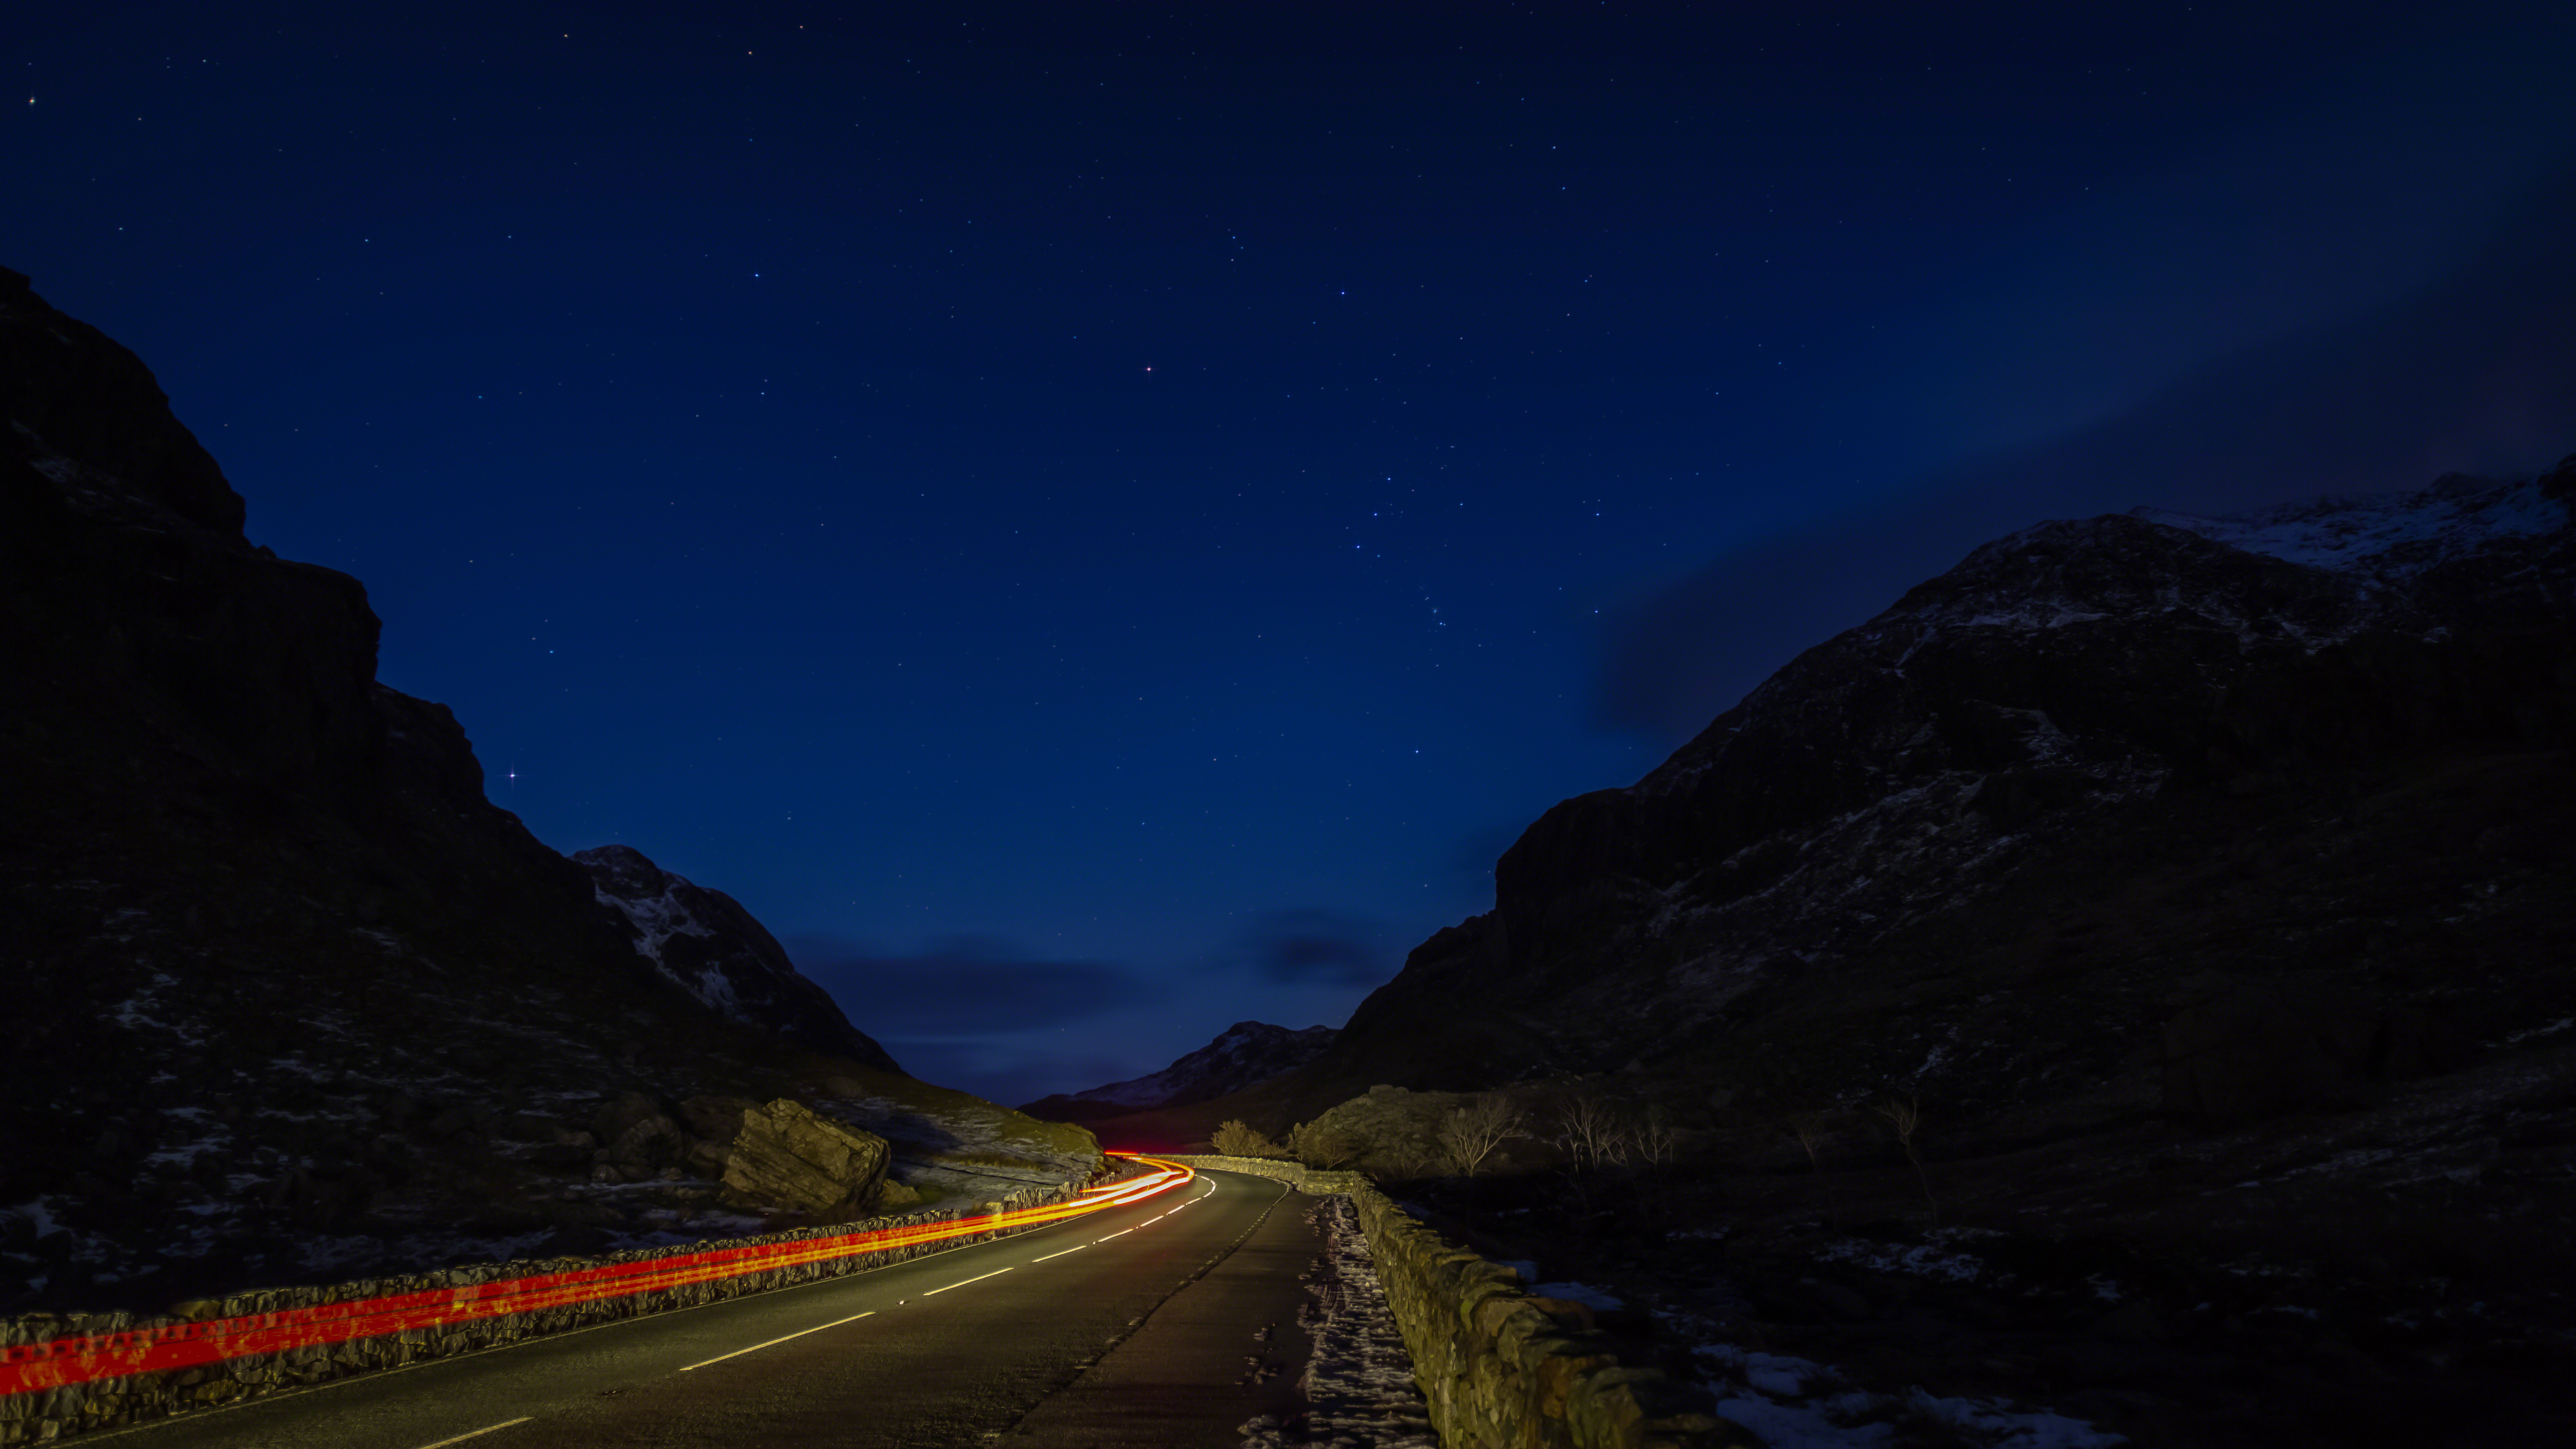 Driving to the Stars by Adrian Kingsley-Hughes